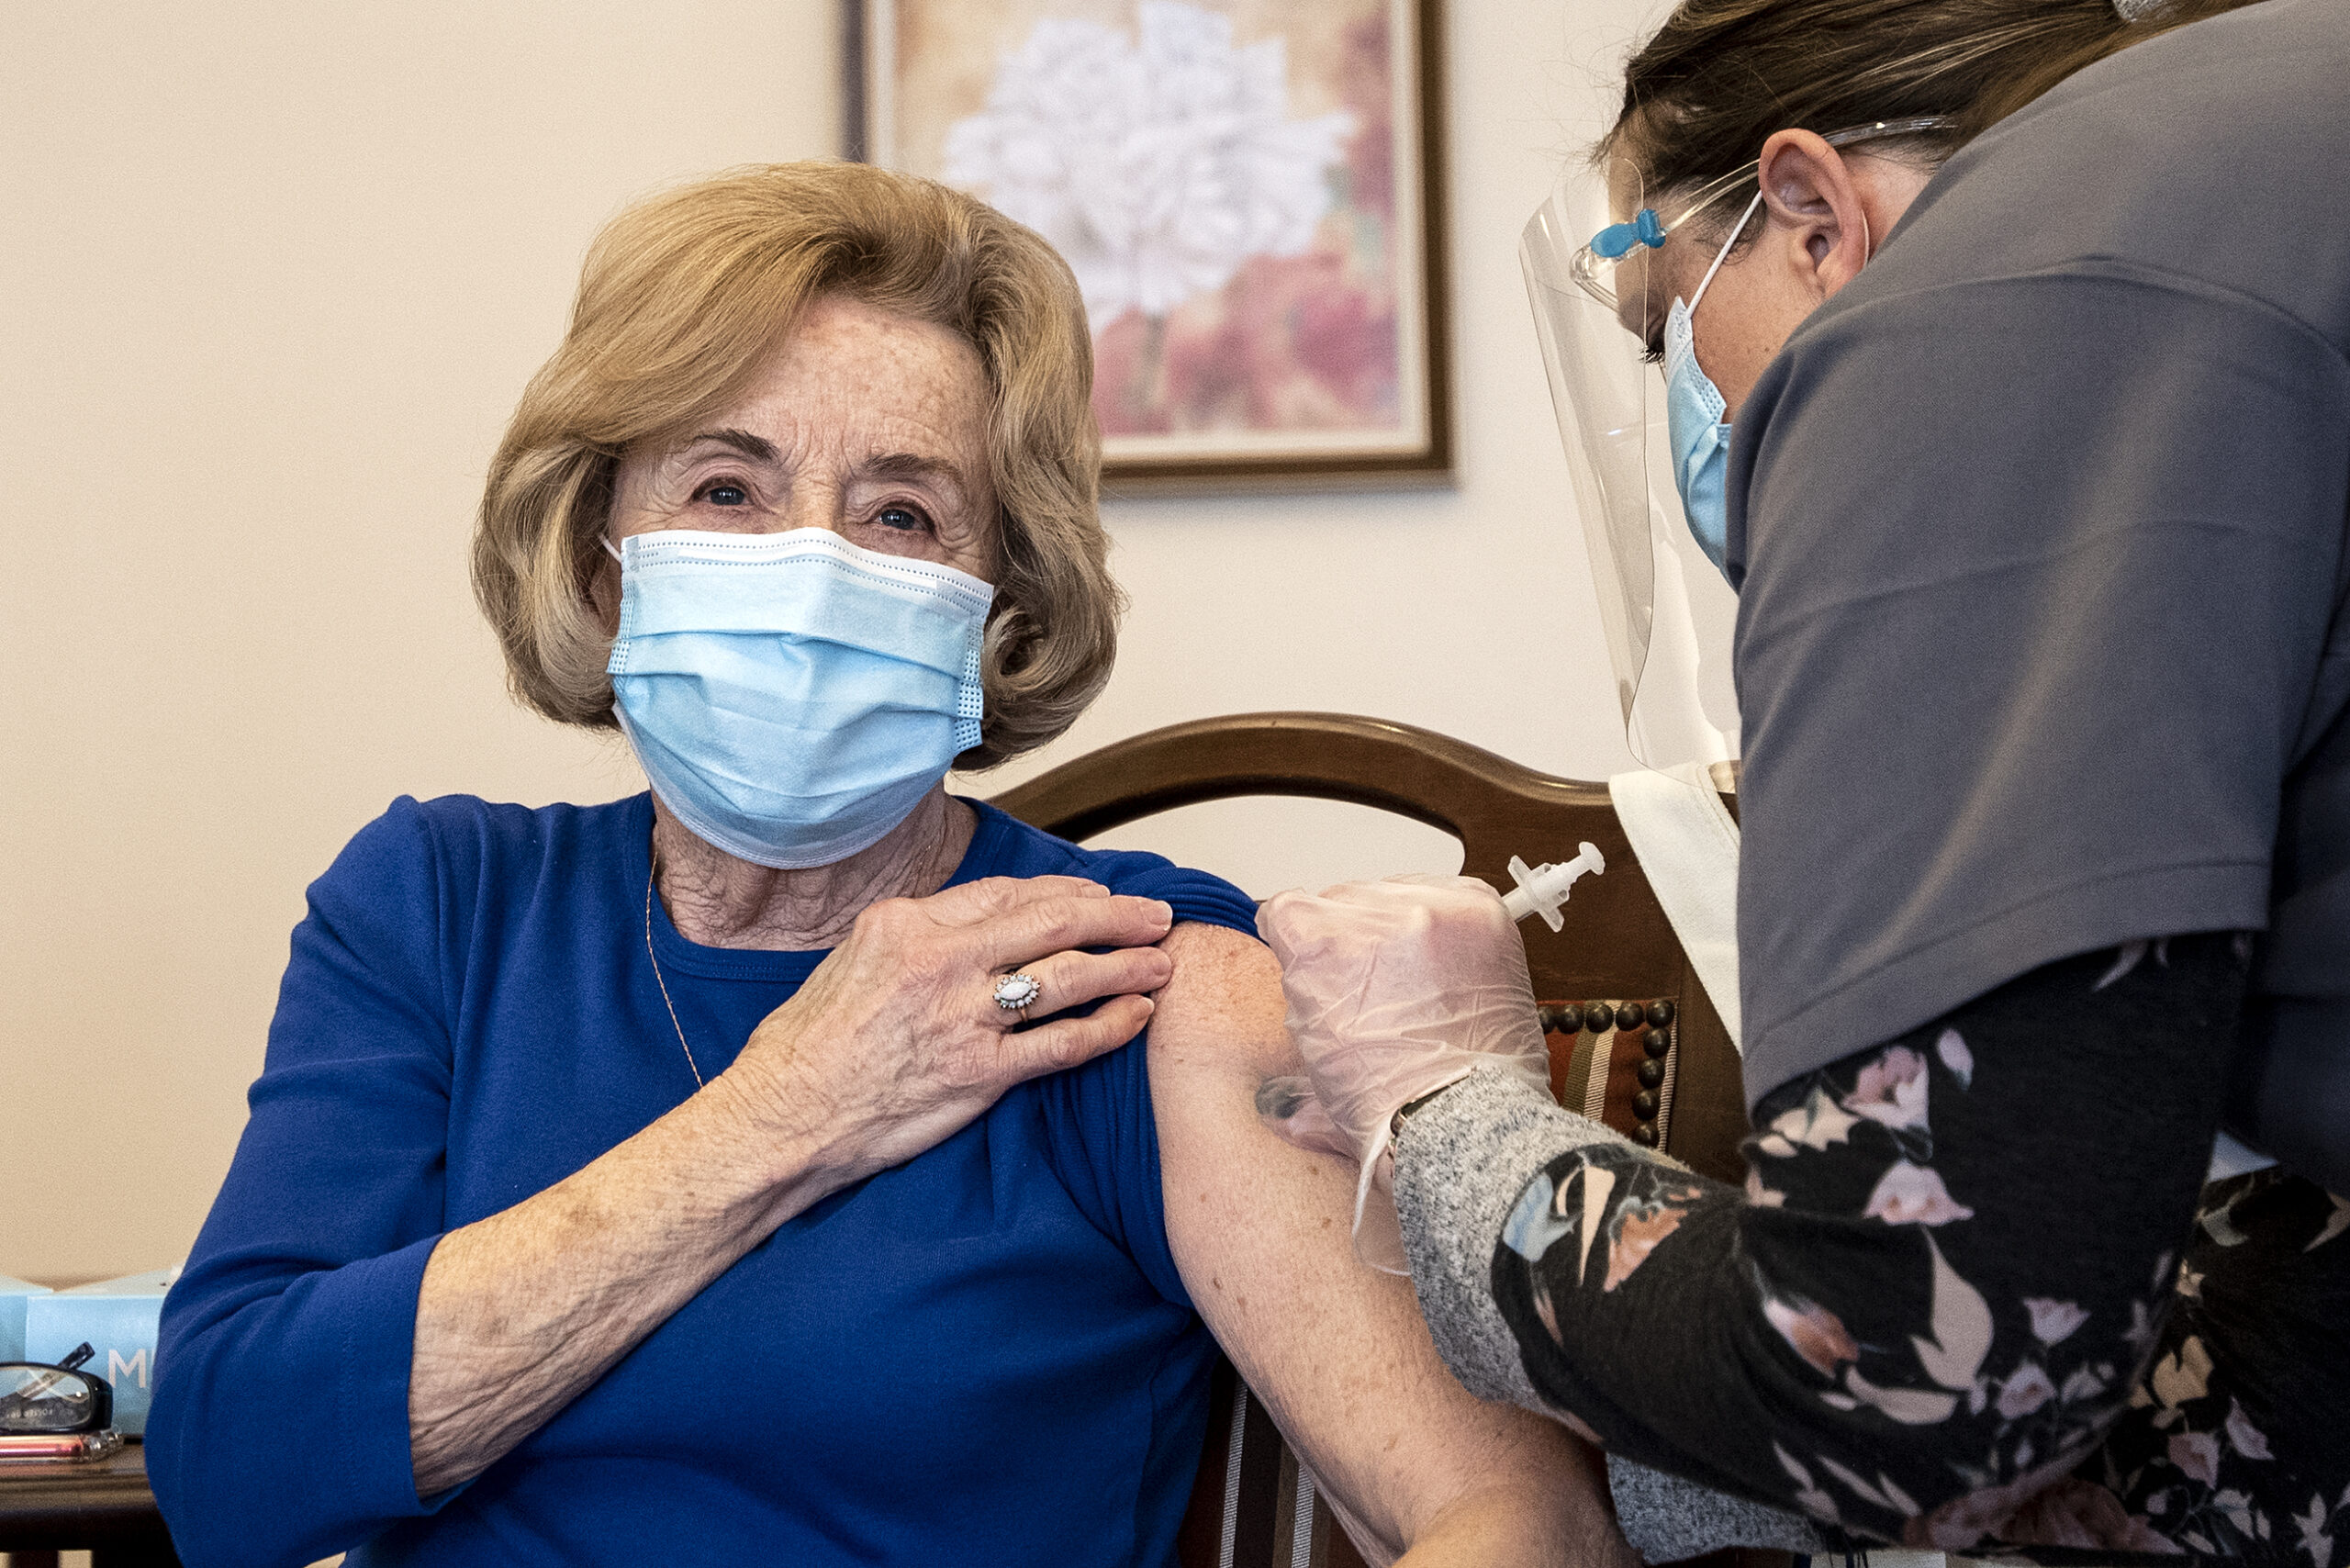 A woman in a blue shirt and blue face mask holds up a sleeve as she receives a shot